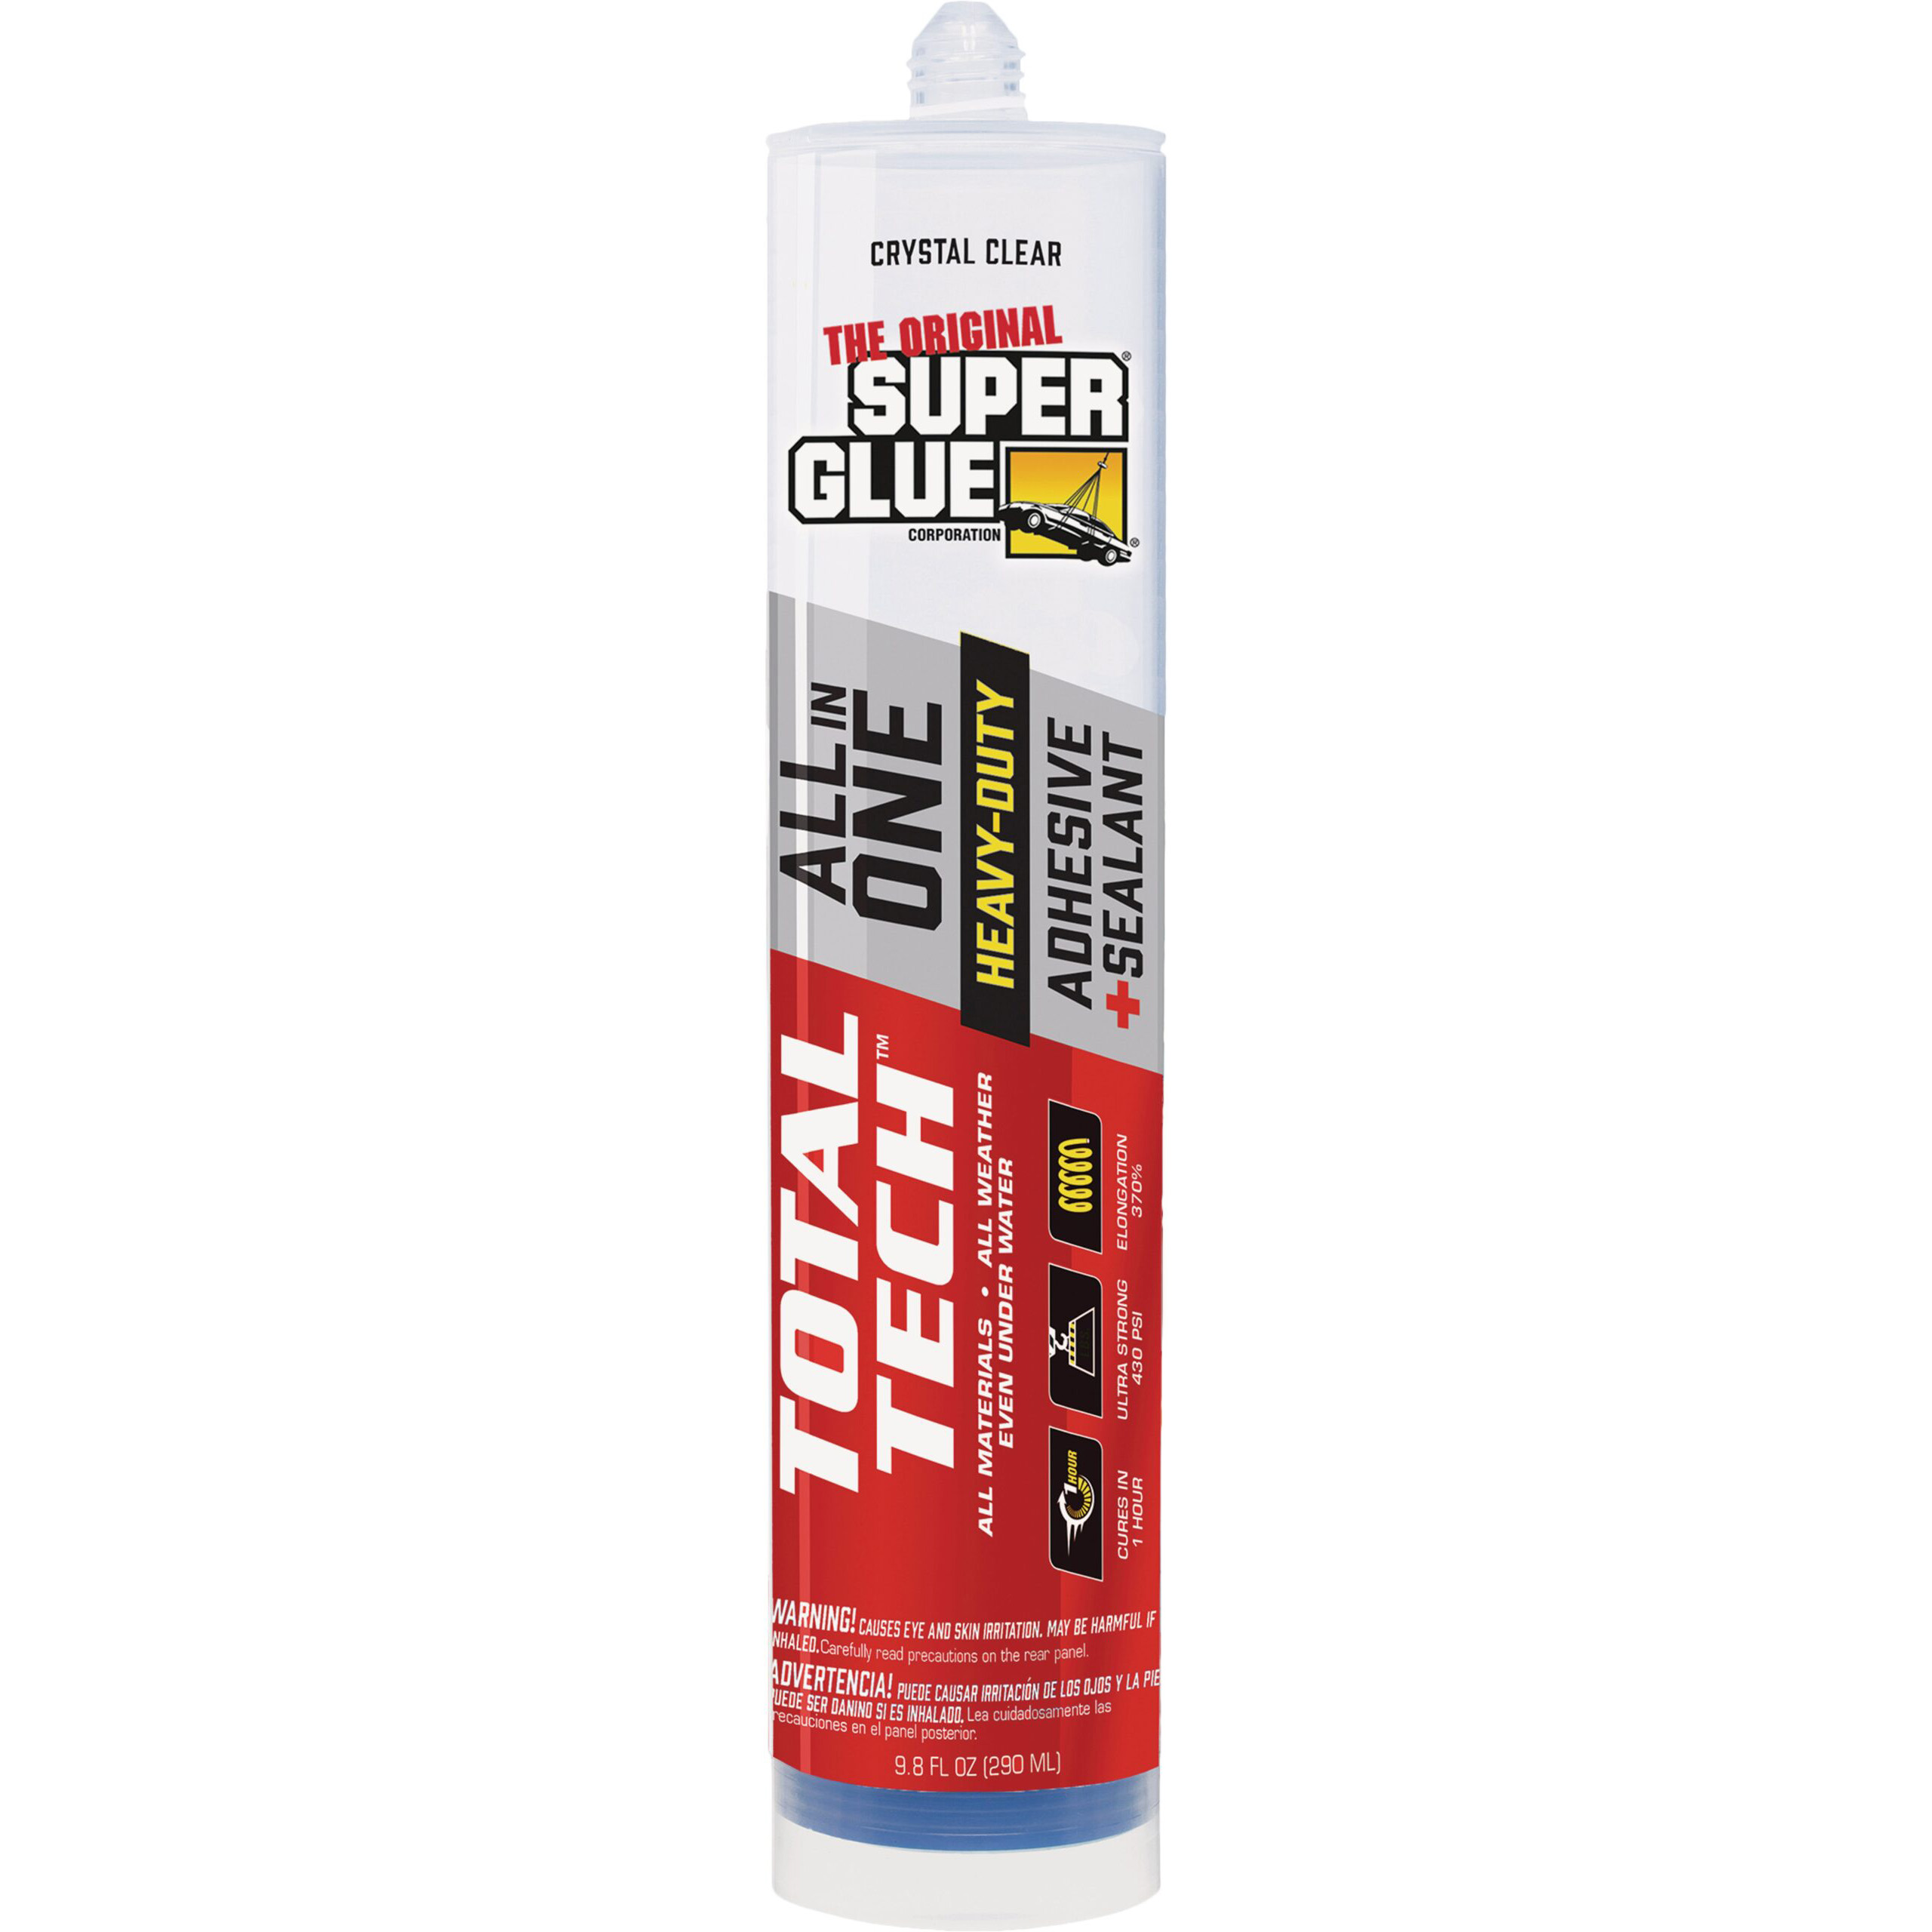 Total Tech White All-in-One Adhesive and Sealant